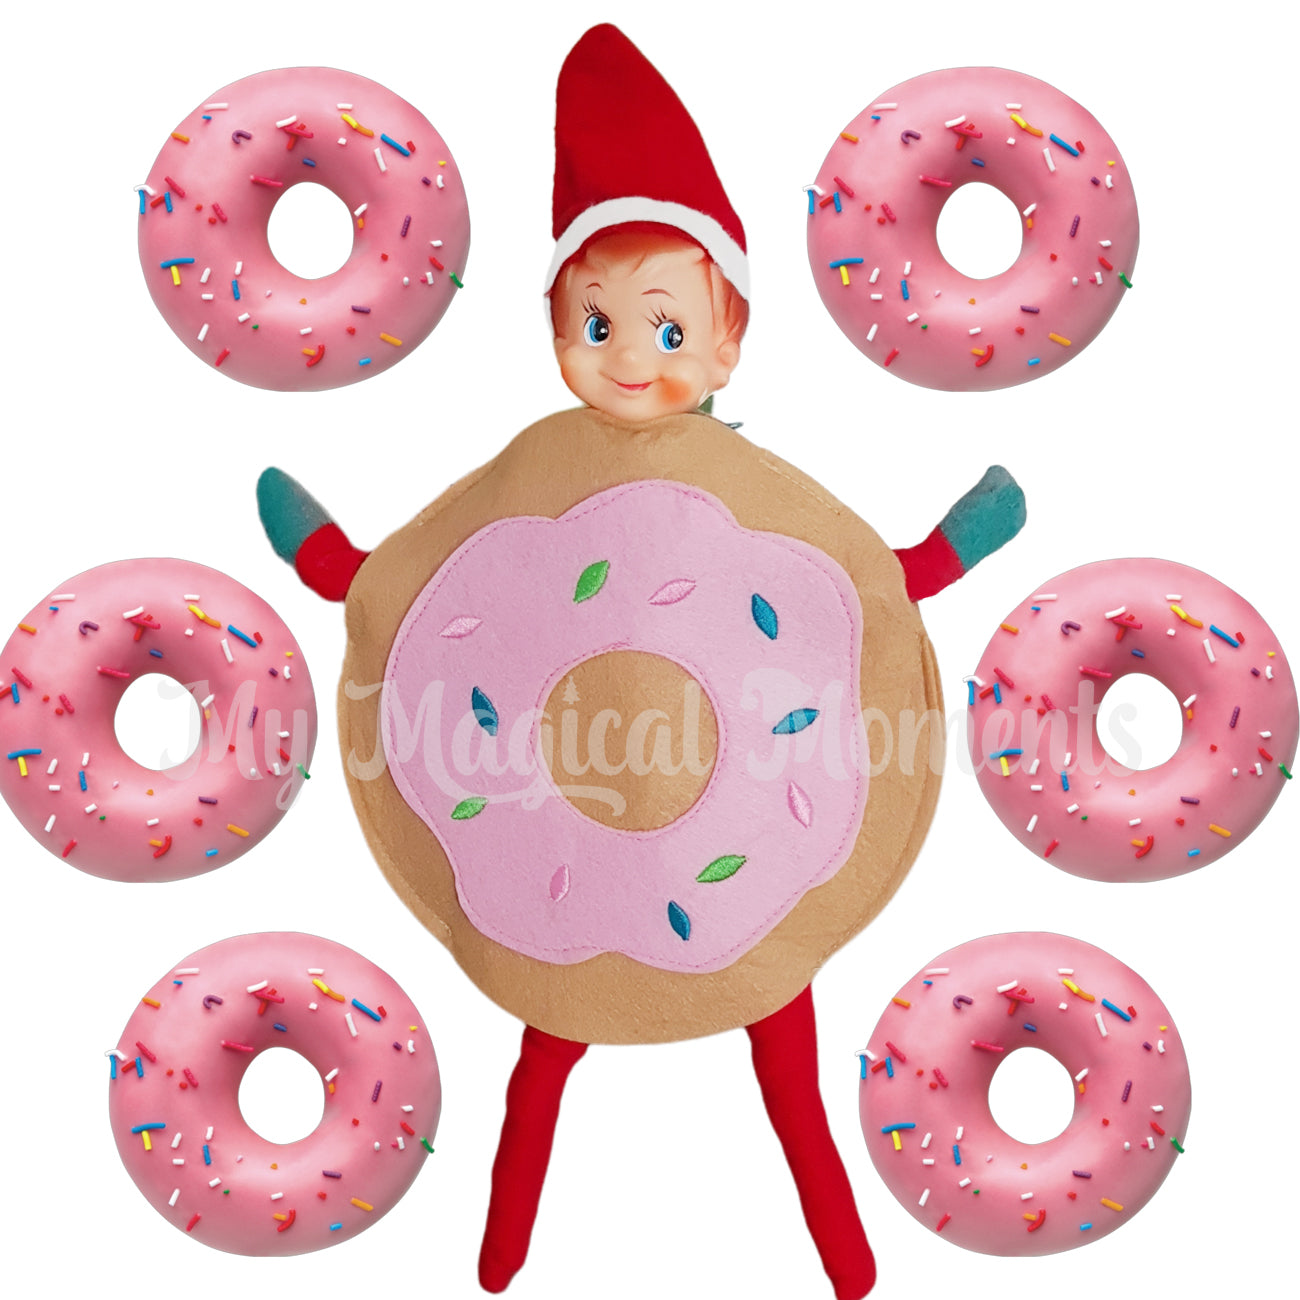 Elf dressed as a doughnut surrounded by pink donuts